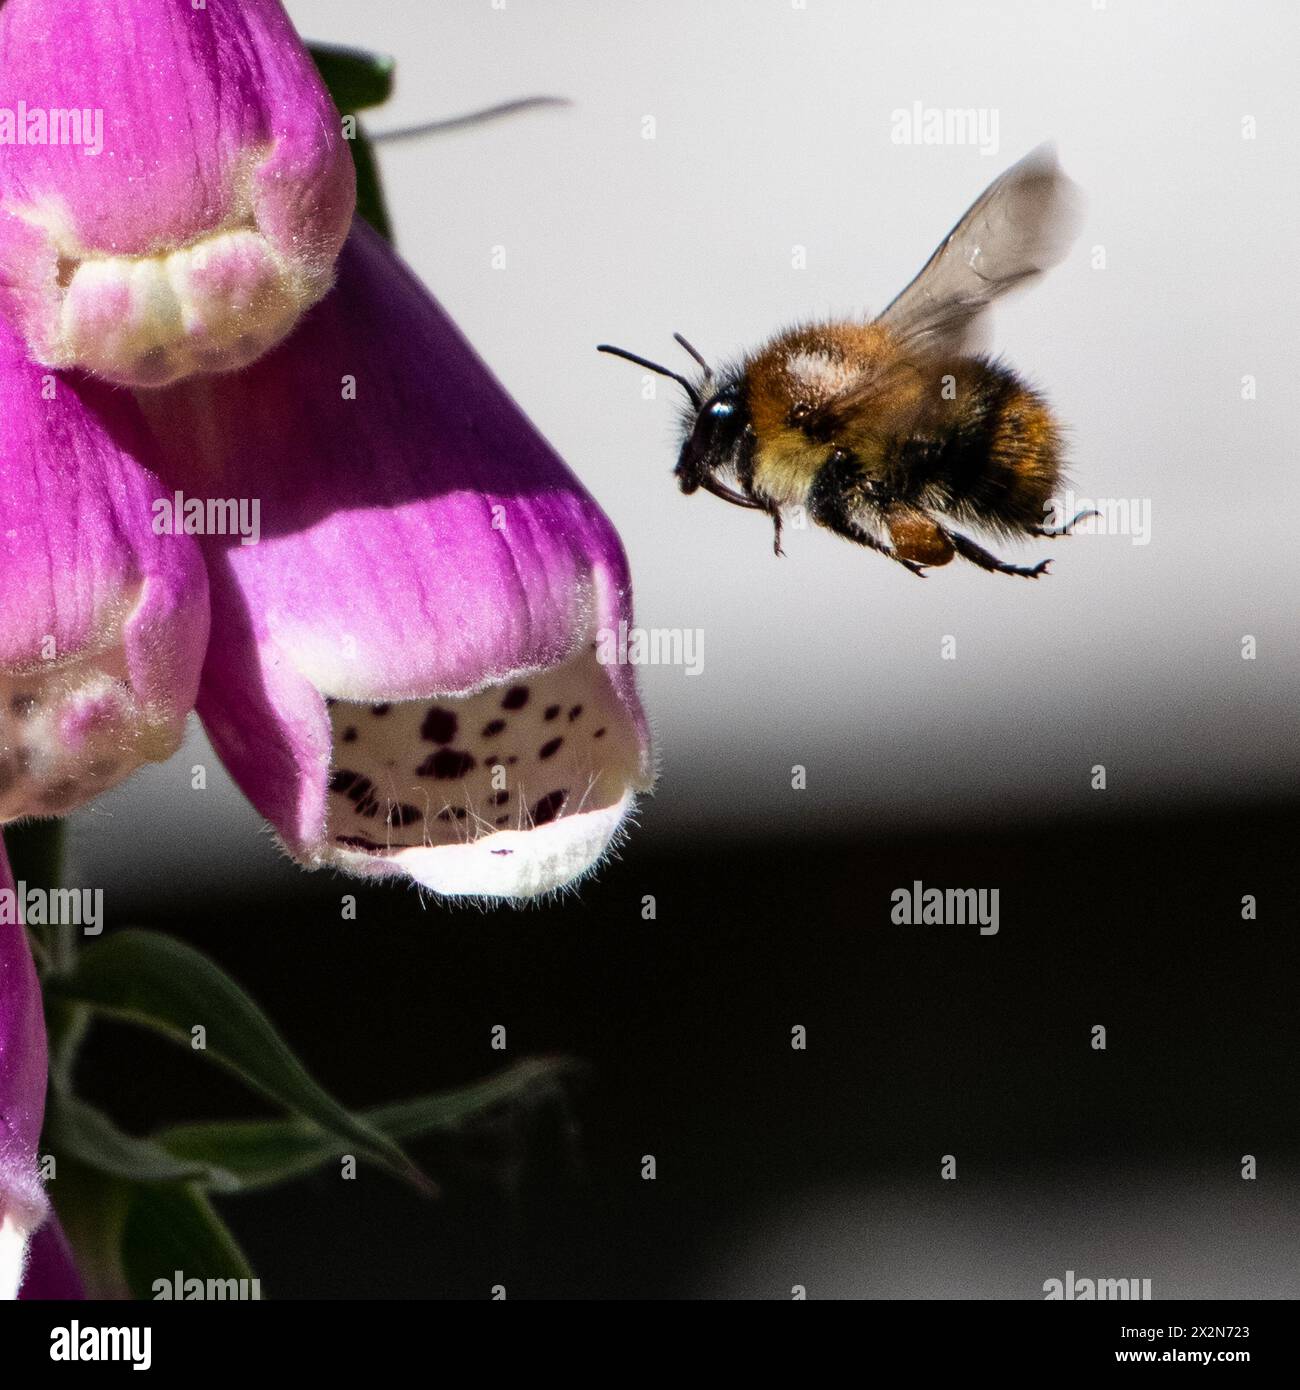 Honey bee seen next to a foxglove flower of which the leaves are poisonous to humans and may be fatal if ingested. Stock Photo